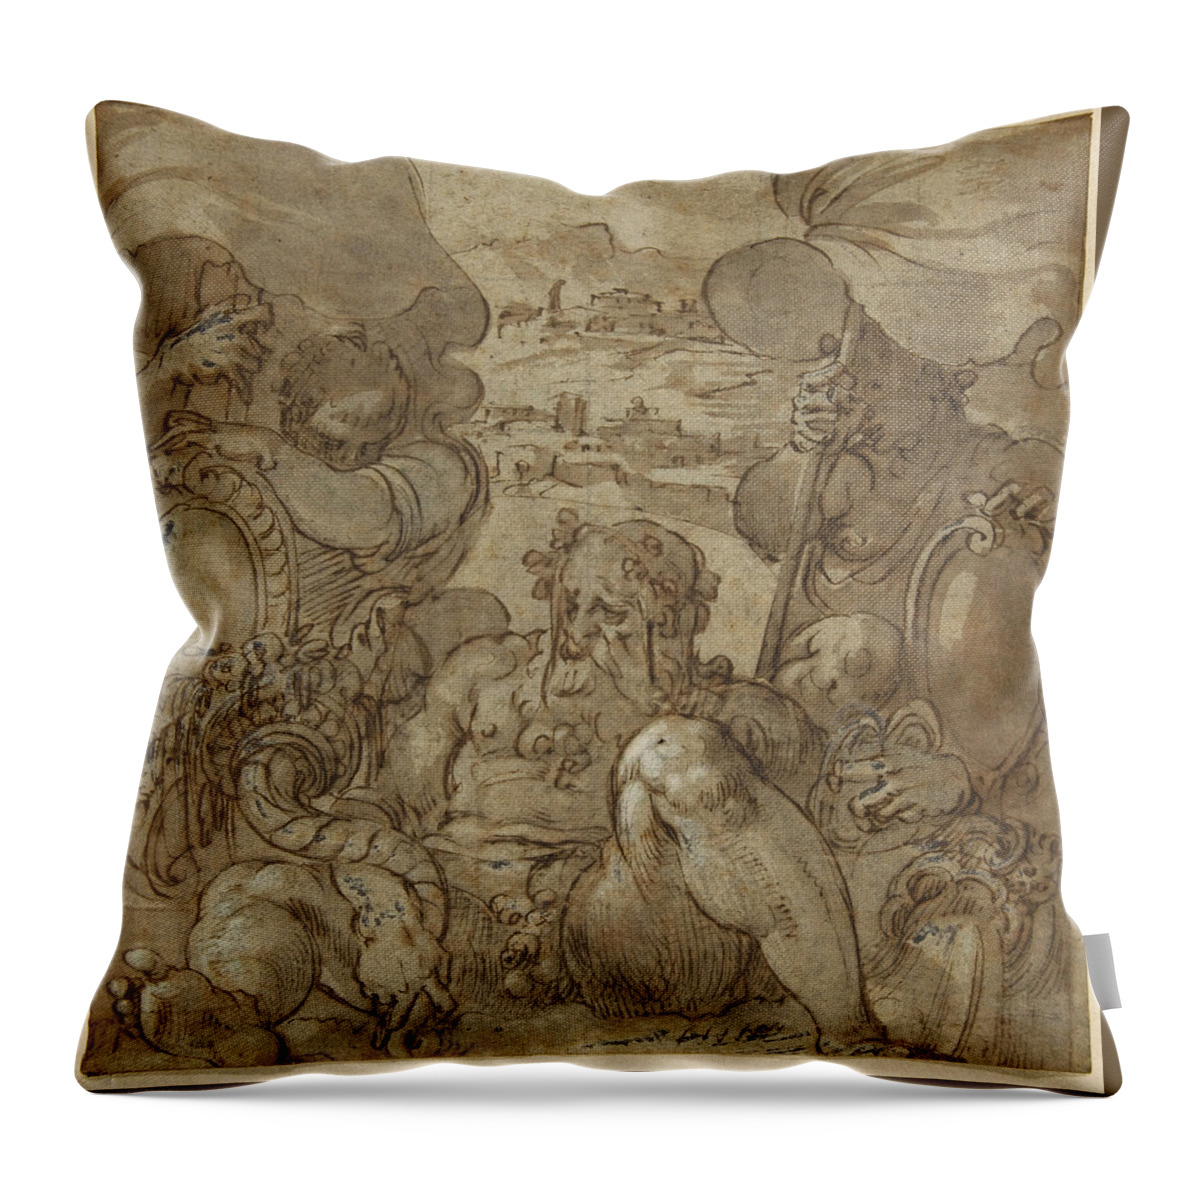 Jacopo Zucchi Throw Pillow featuring the drawing Study for the Allegory of San Gimignano and Colle Val d'Elsa by Jacopo Zucchi